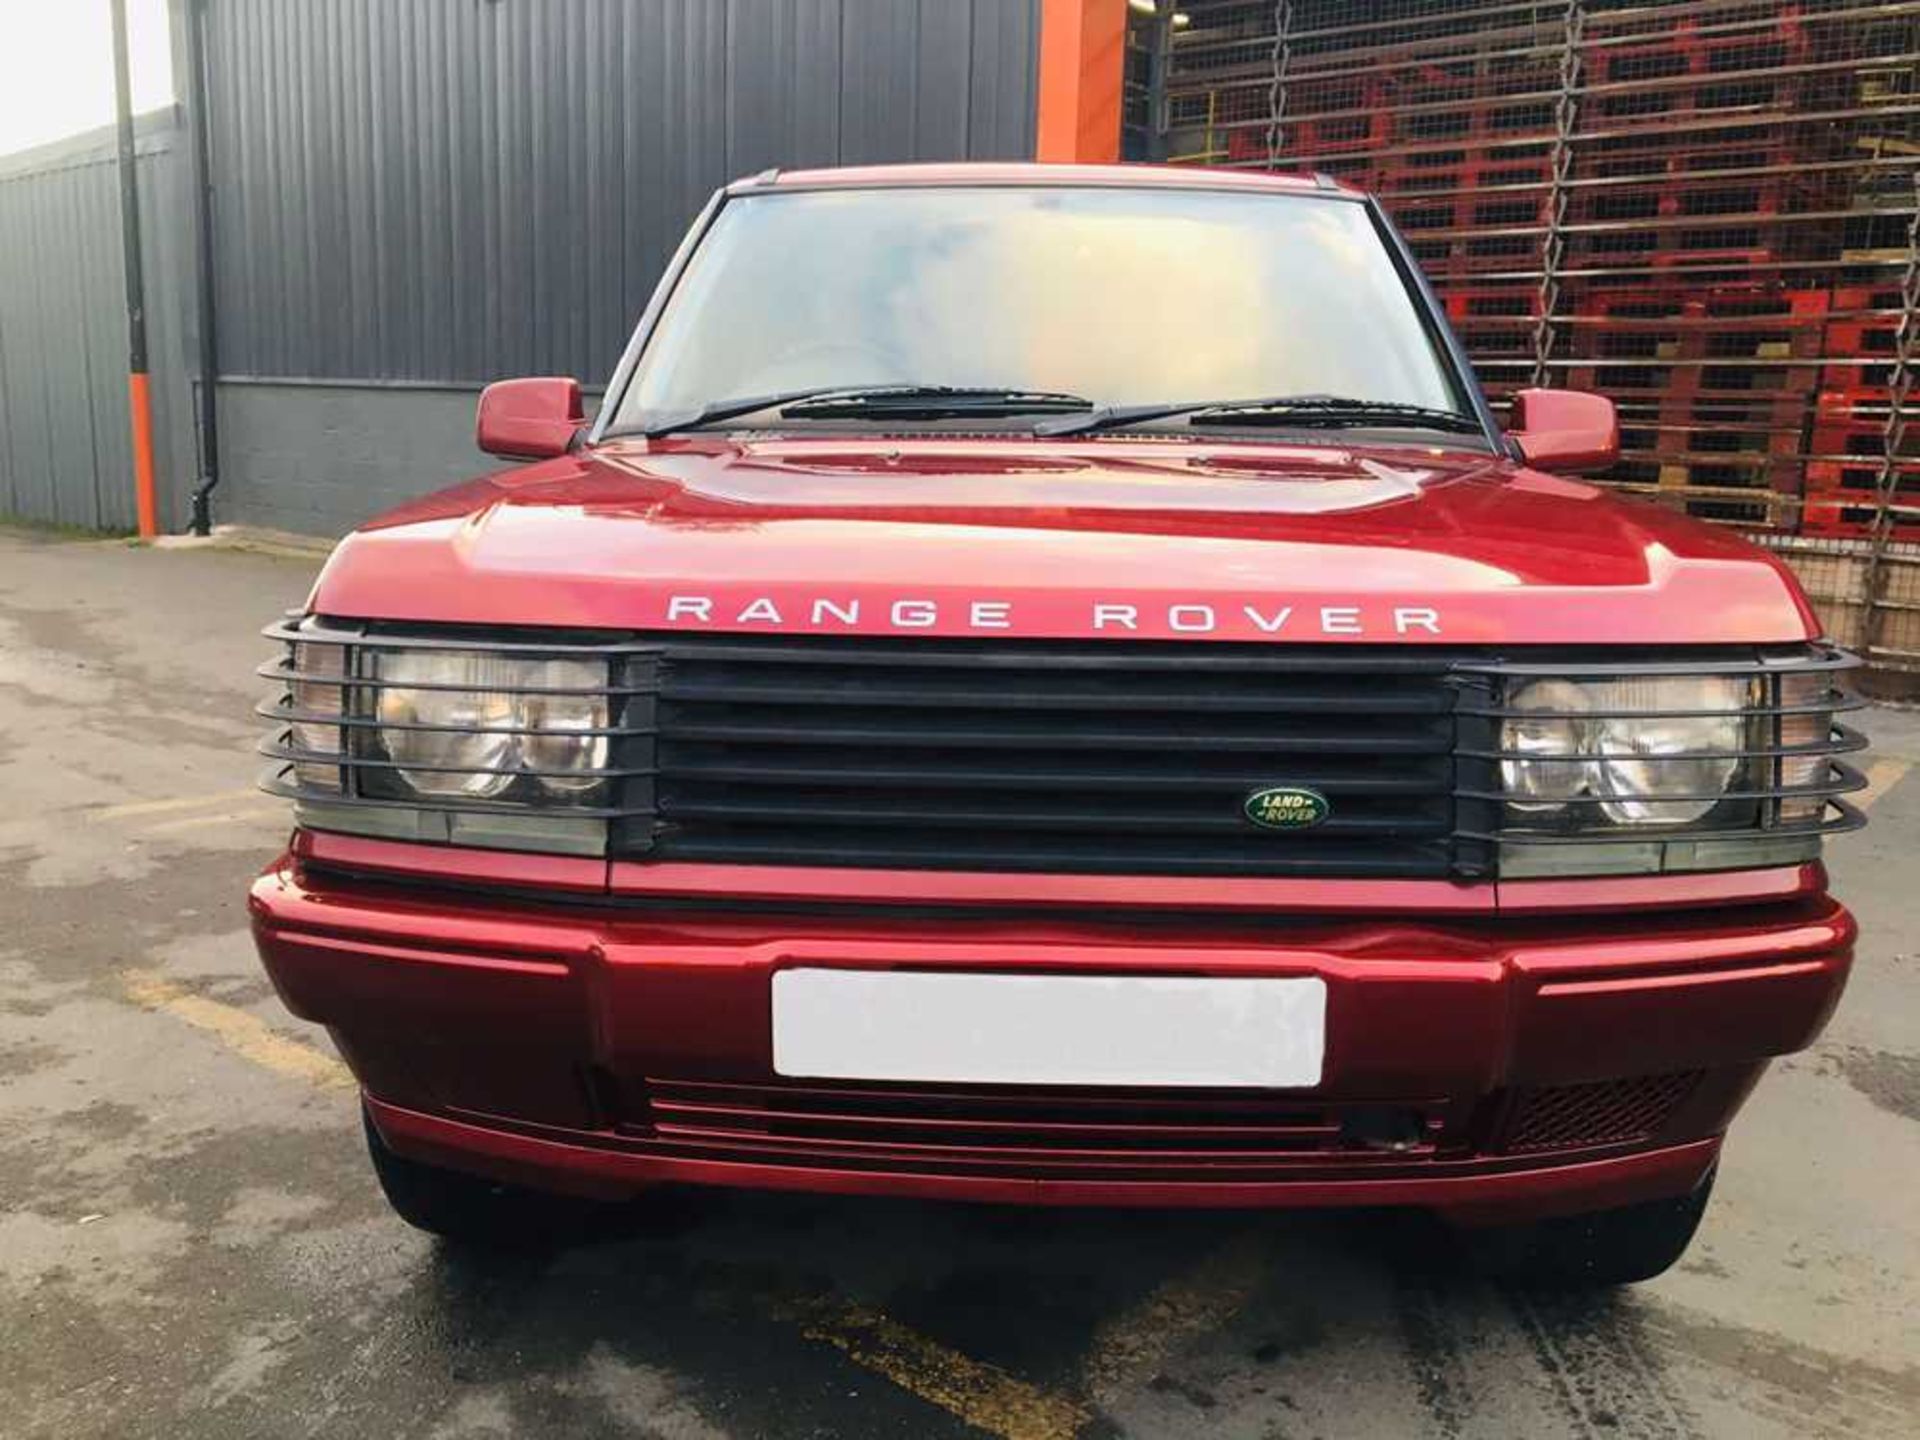 2001 Range Rover 2.5 TD Bordeaux One of just 200 UK-supplied limited edition 'Bordeaux' examples - Bild 2 aus 20